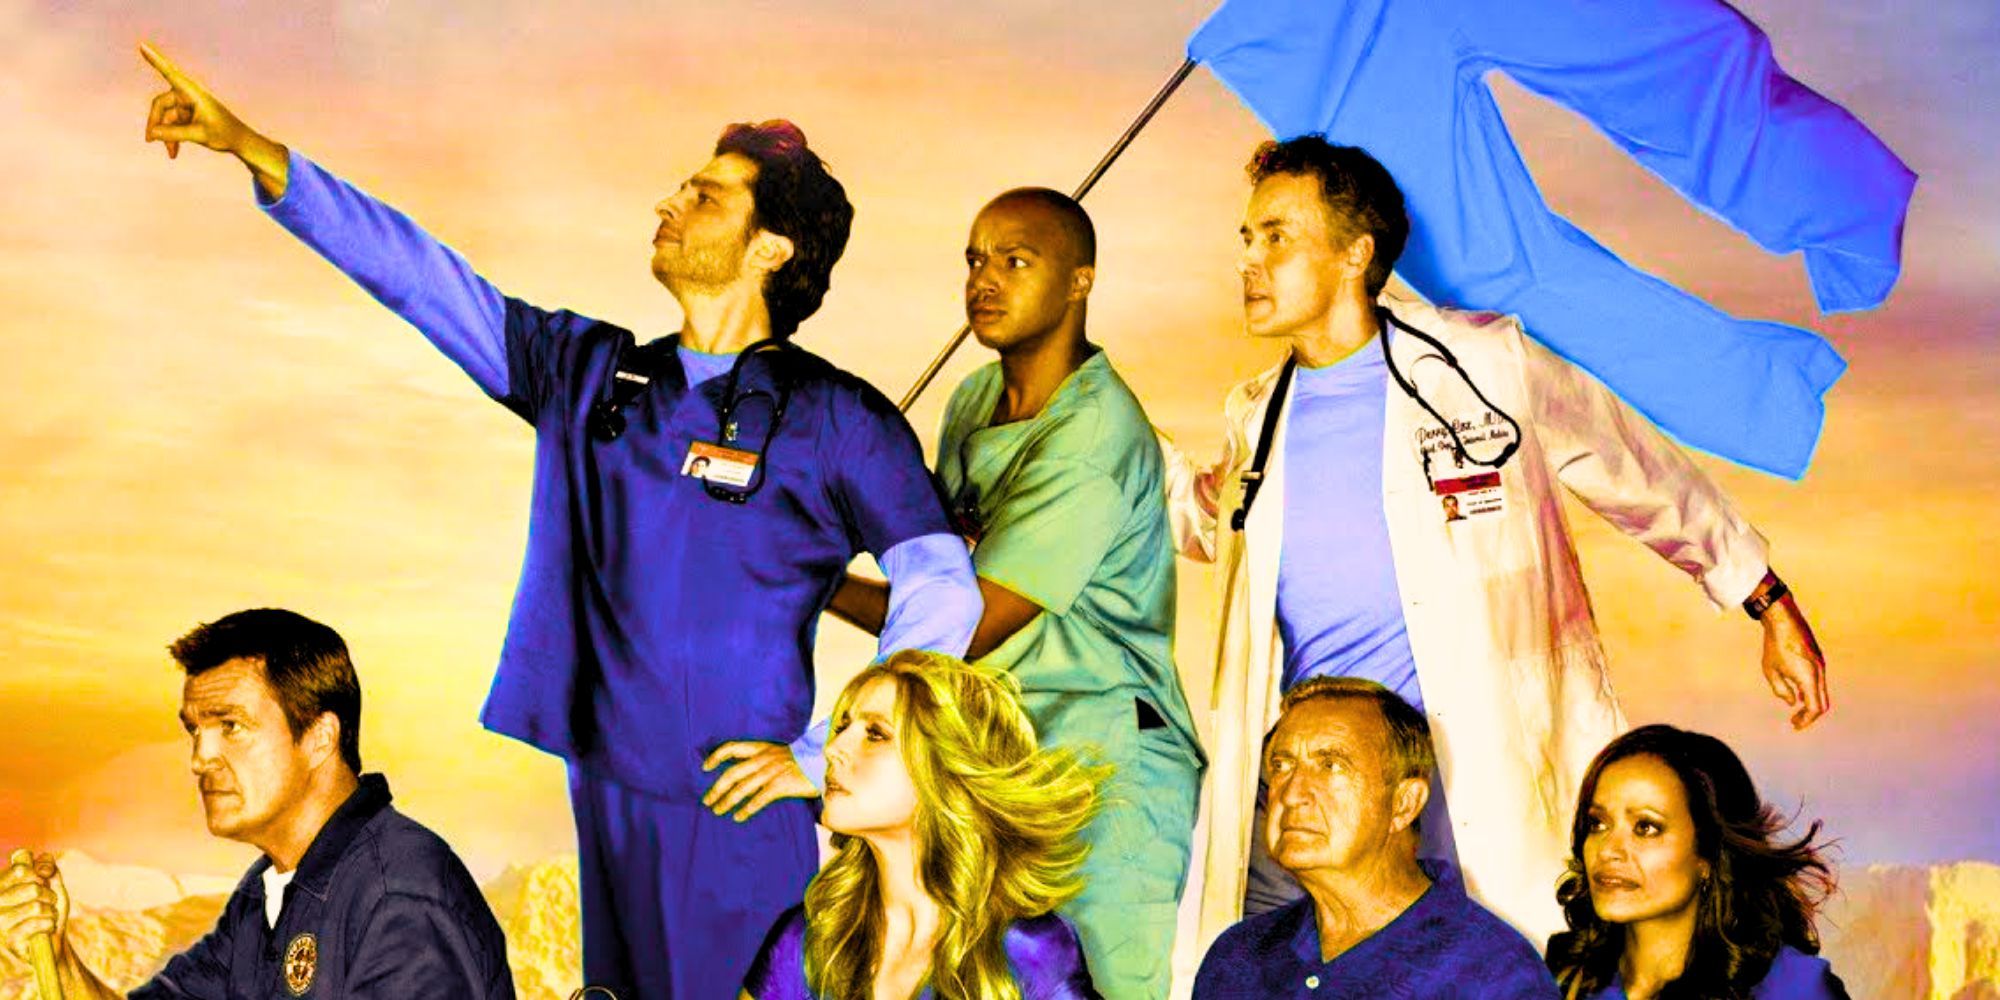 The cast of Scrubs looking to the left as the pretend to sail a ship with a pair of pants as a flag